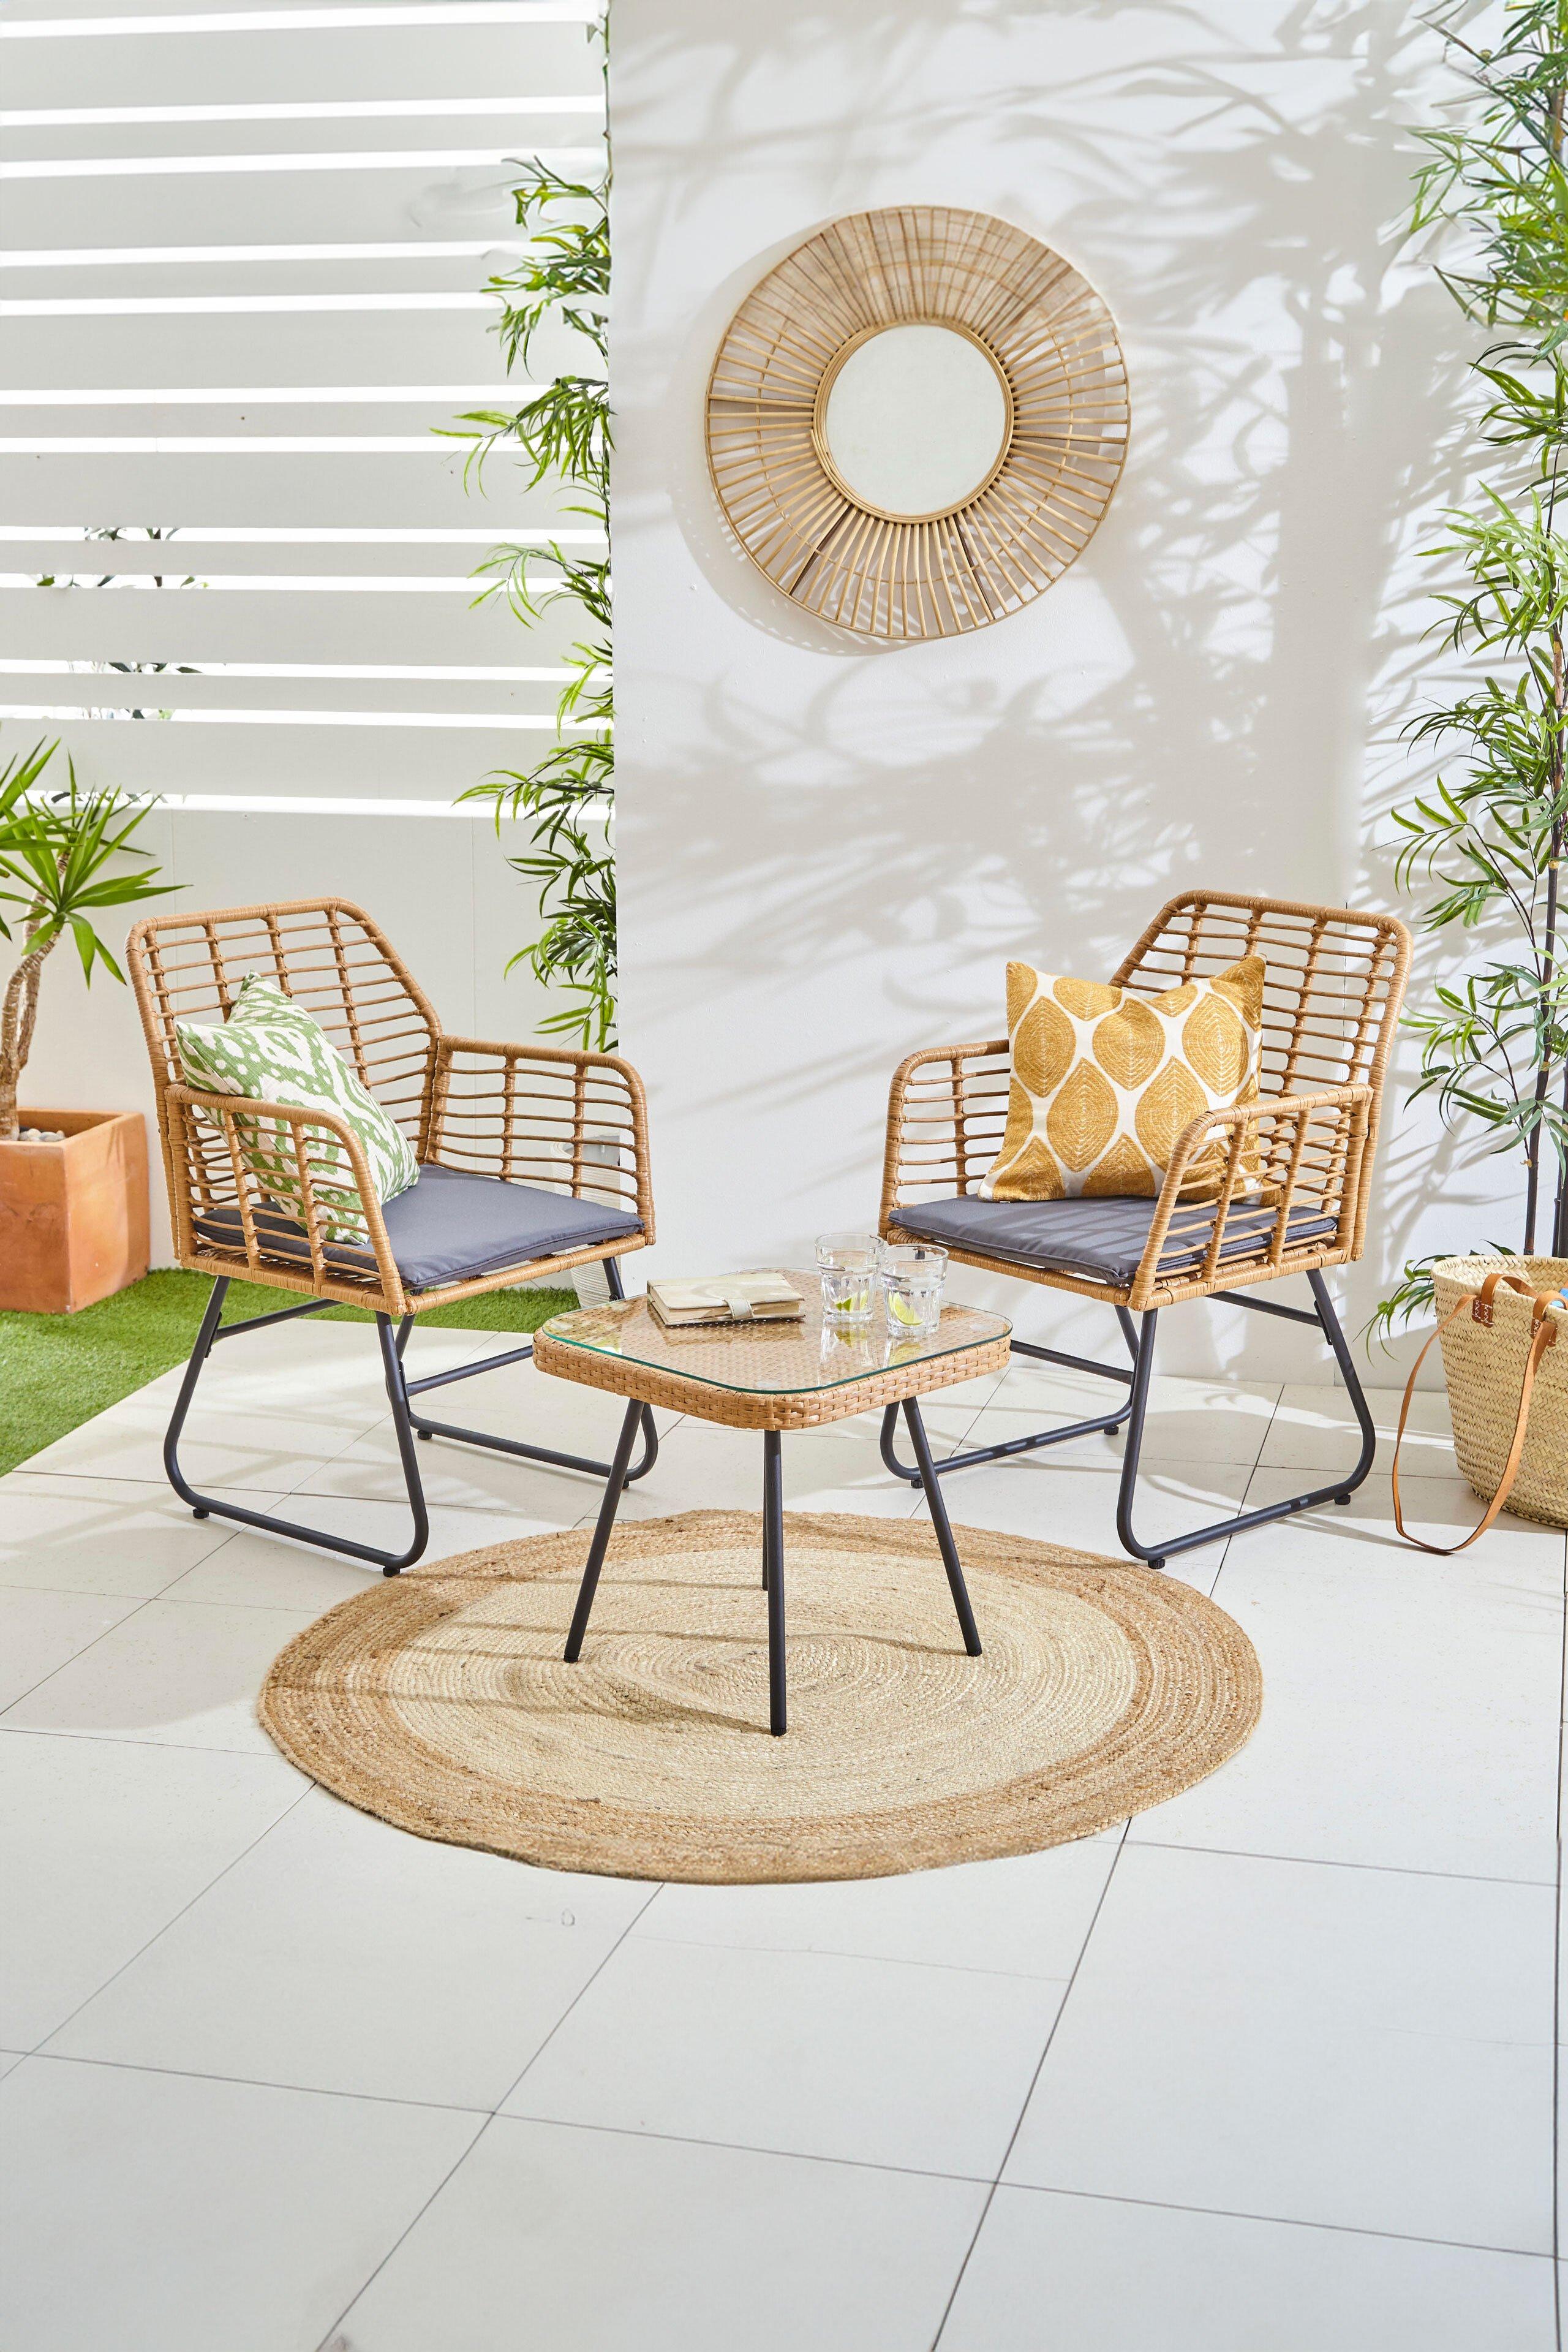 3 Piece Bamboo Style Garden Table & Chairs Bistro Set